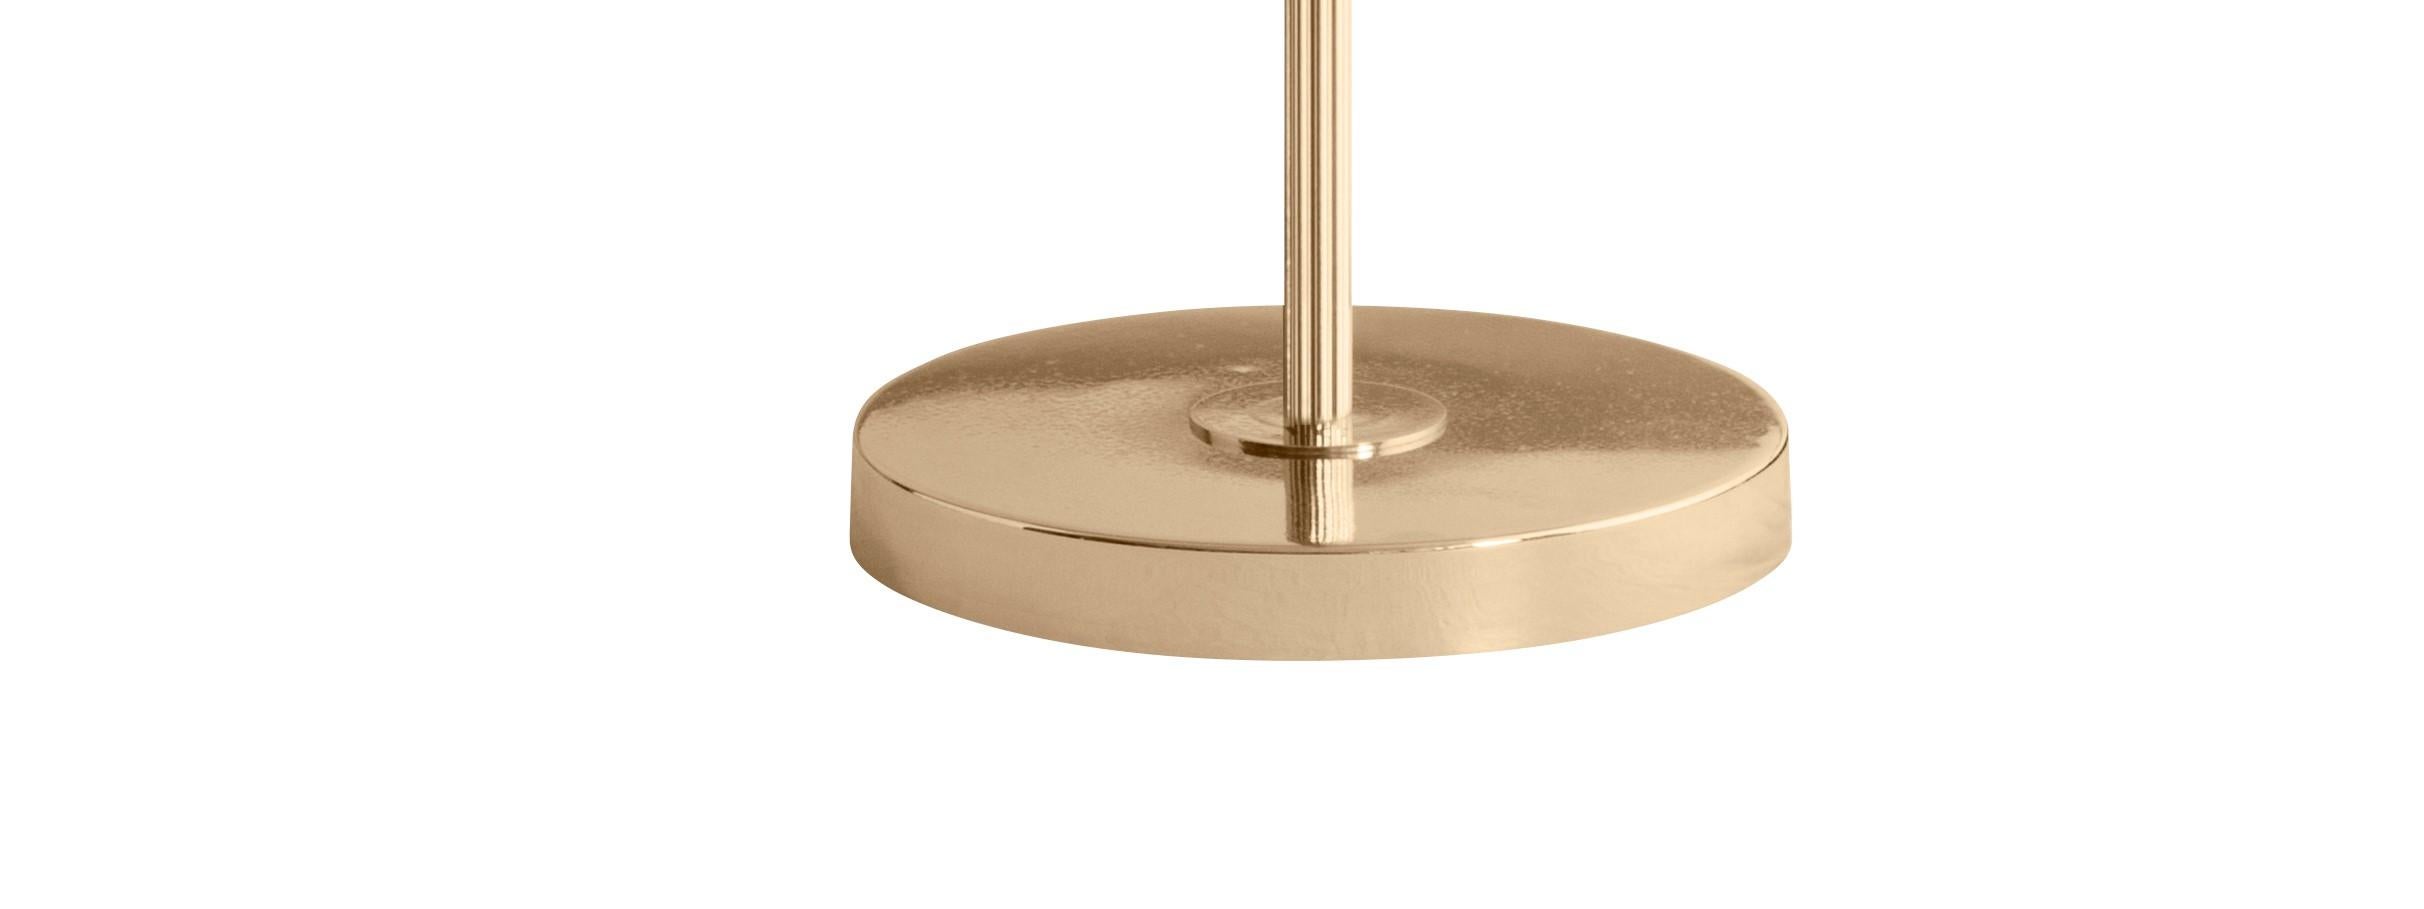 Brass 06 floor lamp 150 by Magic Circus Editions
Dimensions: D 25 x H 150 cm
Materials: Brass base, smooth brass tube, glossy mouth blown glass
Dimmable version available.


Rethinking, reimagining, redesigning familiar objects that we look at